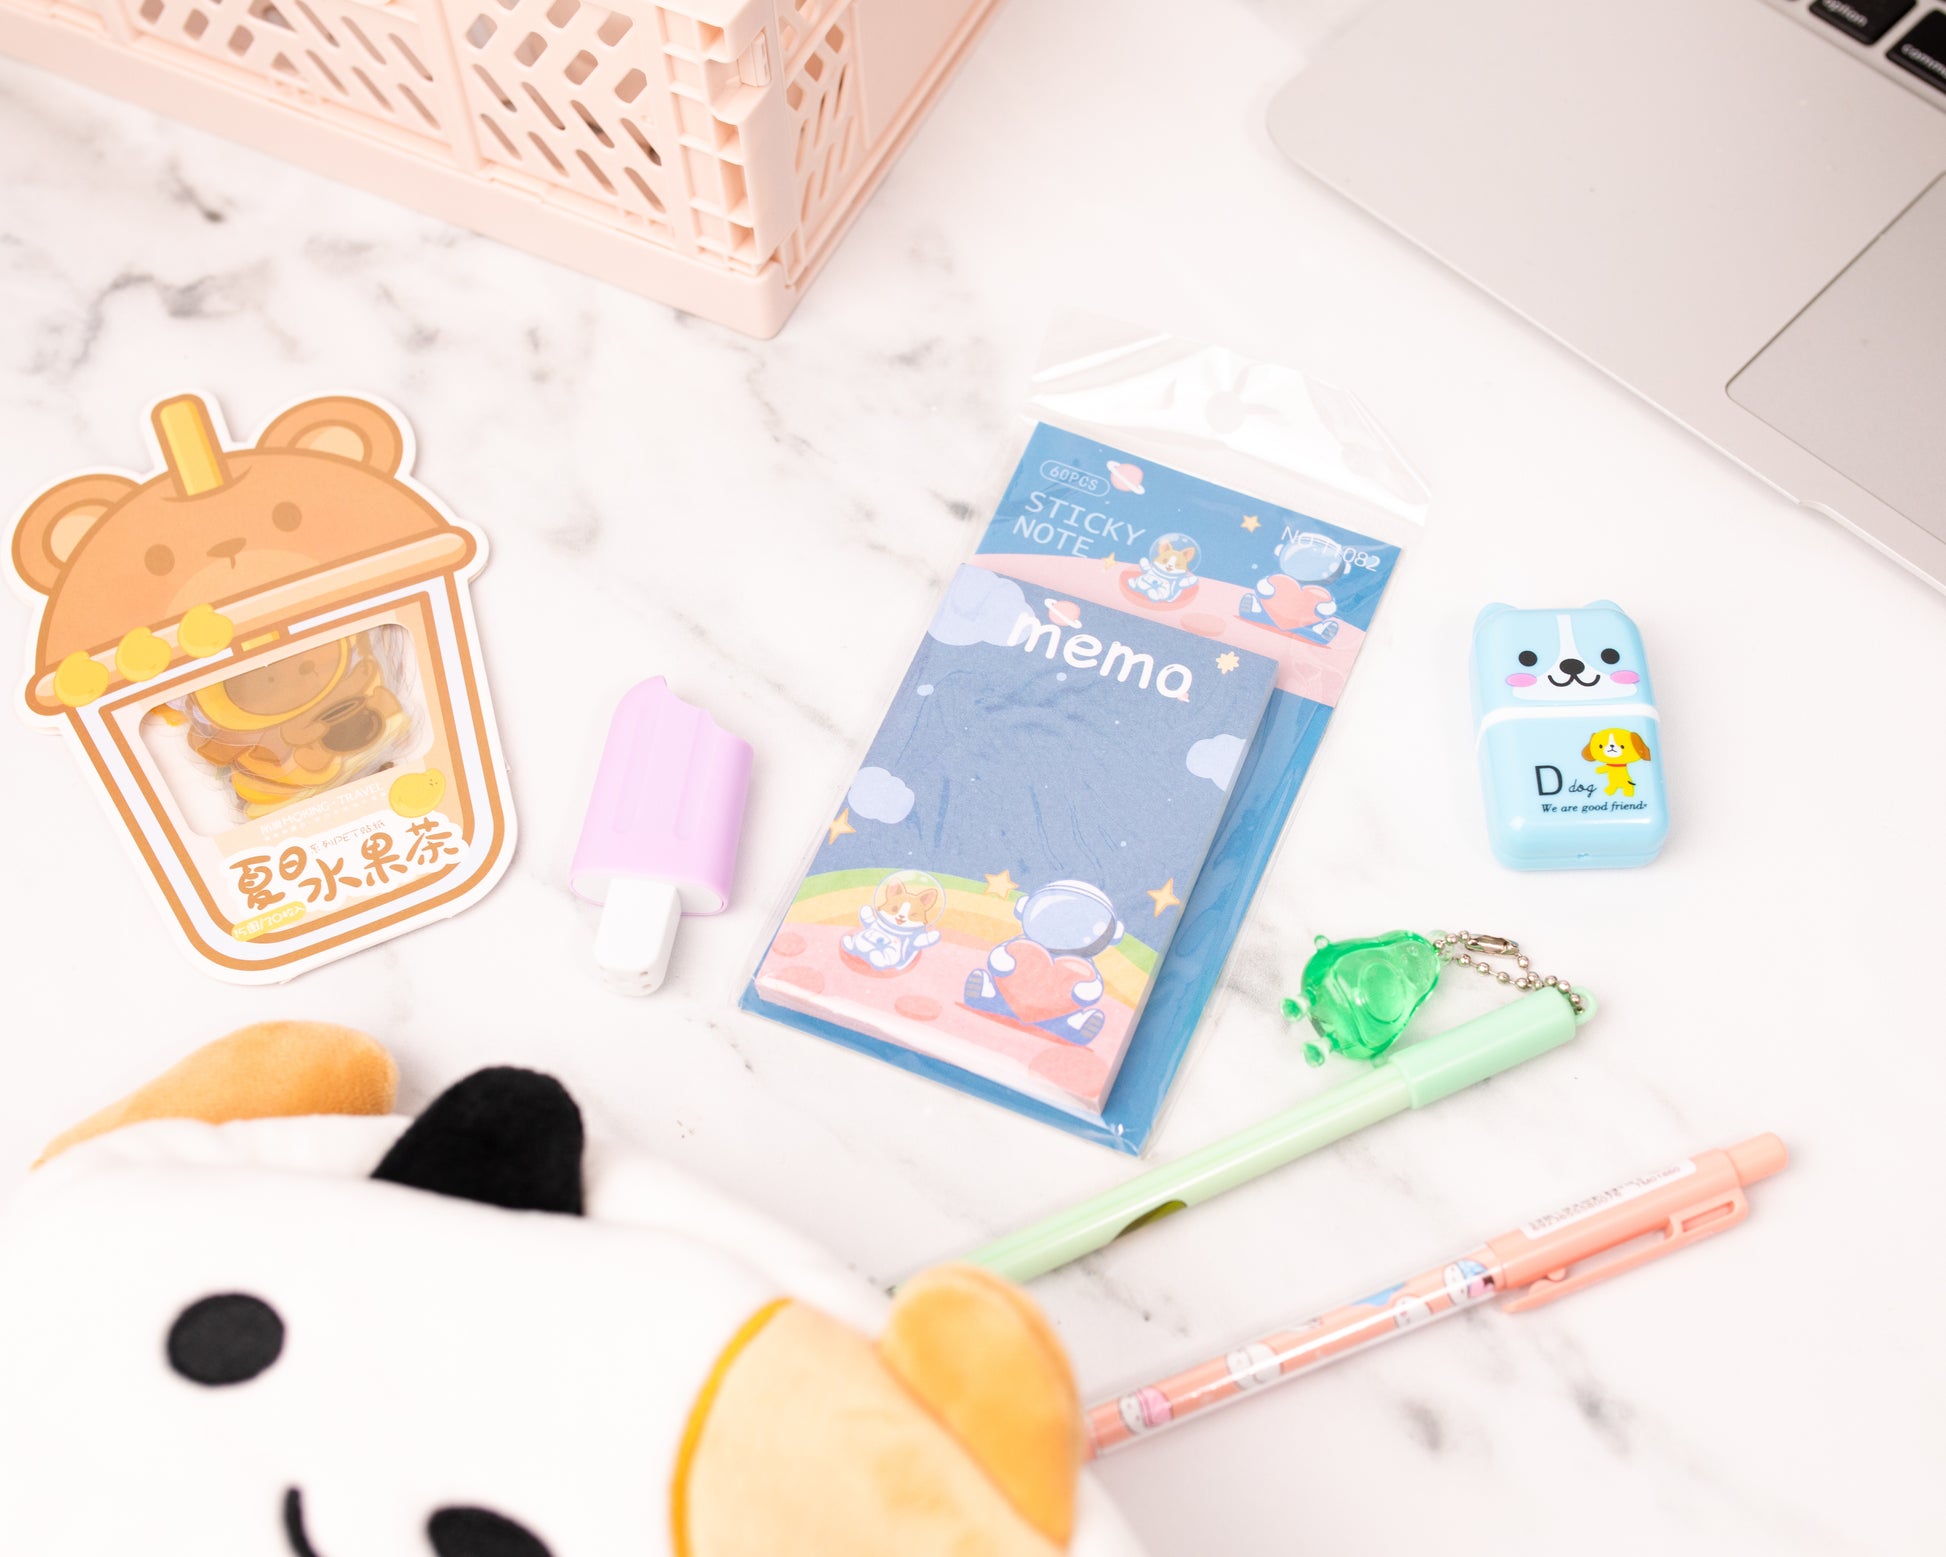 Kawaii Stationery Box Grab Bag Stickers Pencil Cases Mega School Supplies  Deco Journal Sets Surprise Mystery Stationery Bundle Set Gift 